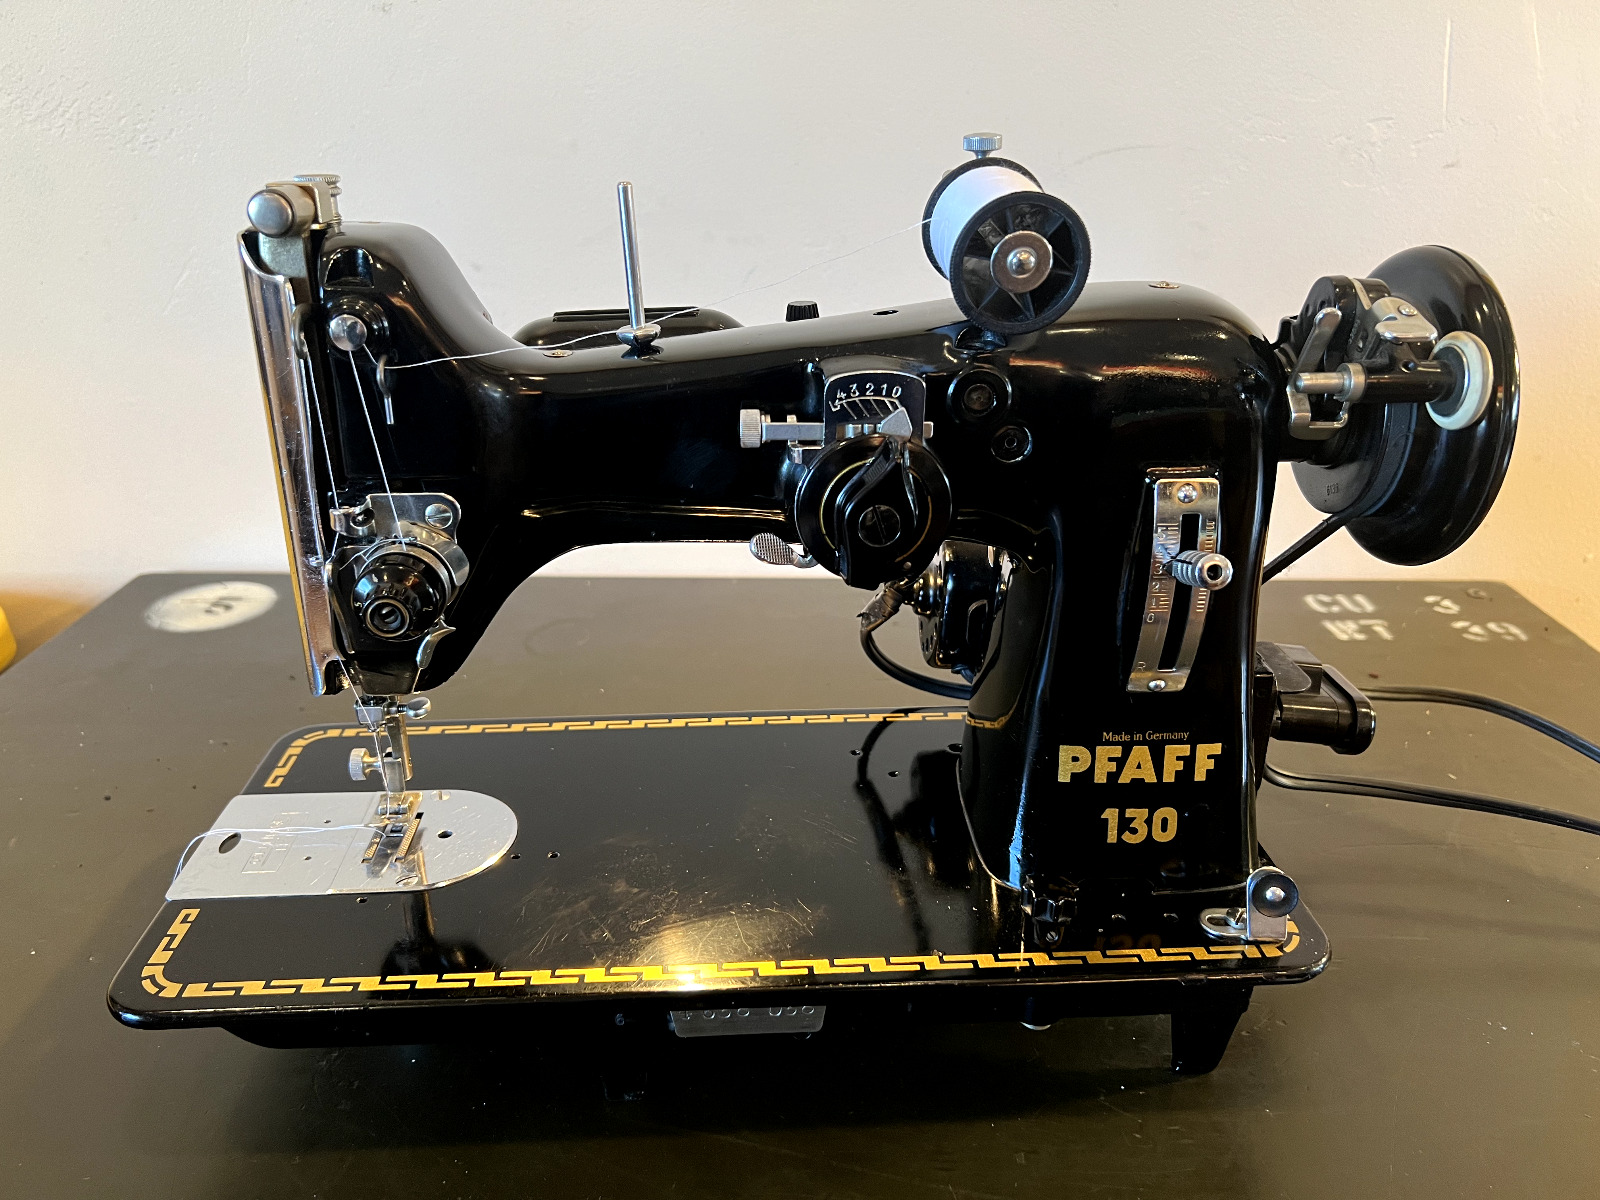 PFAFF 130 HEAVY DUTY SEWING MACHINE INDUSTRIAL LEATHER UPHOLSTERY SAIL WORK